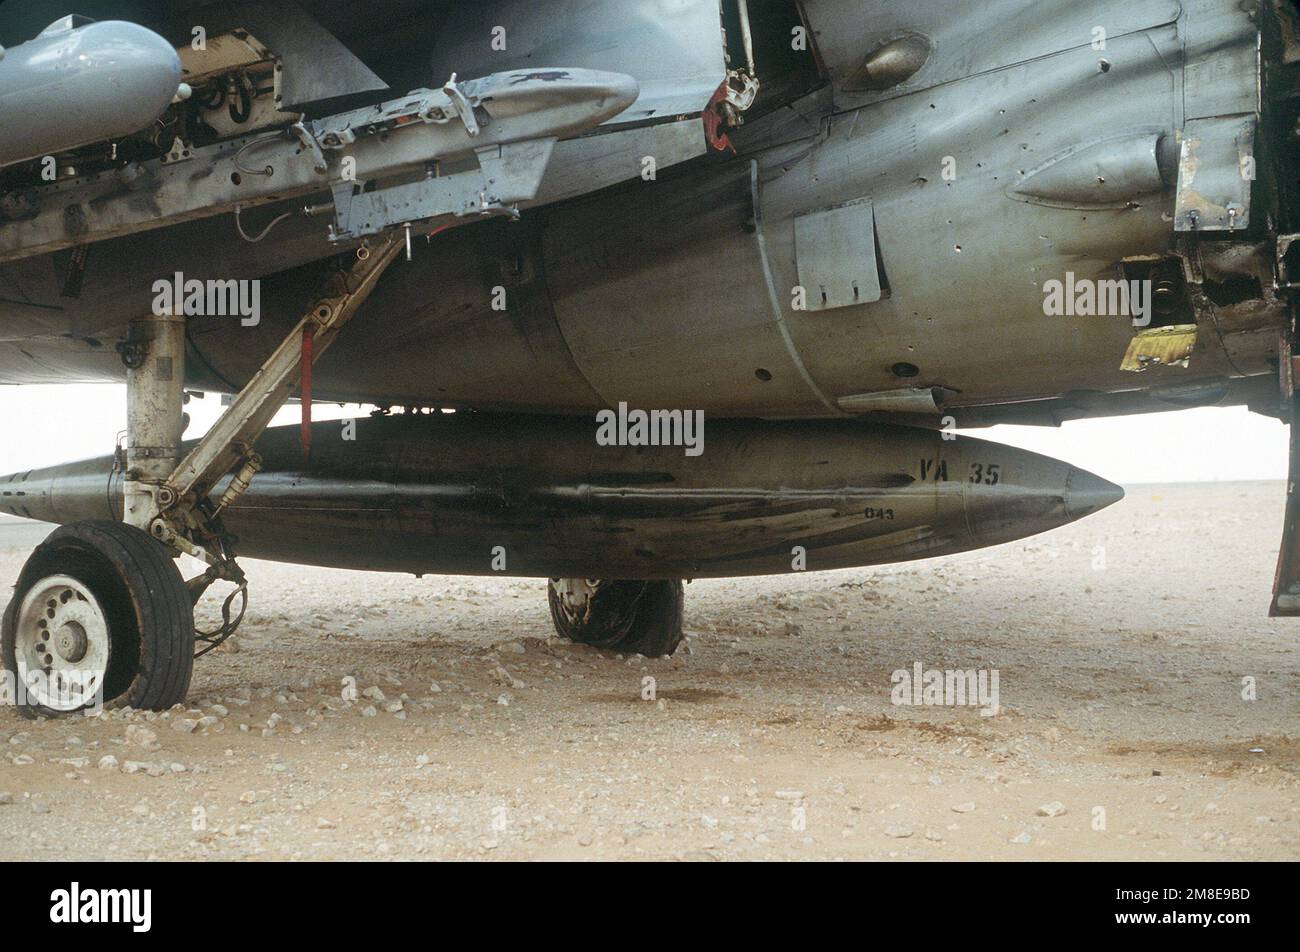 A fuel tank and the undercarriage of an A-6E Intruder attack aircraft from Attack Squadron 35 (VA-35), deployed from the aircraft carrier USS SARATOGA (CV-60), shows battle damage from a mission at the start of Operation Desert Storm.. Subject Operation/Series: DESERT STORM Country: Saudi Arabia(SAU) Stock Photo